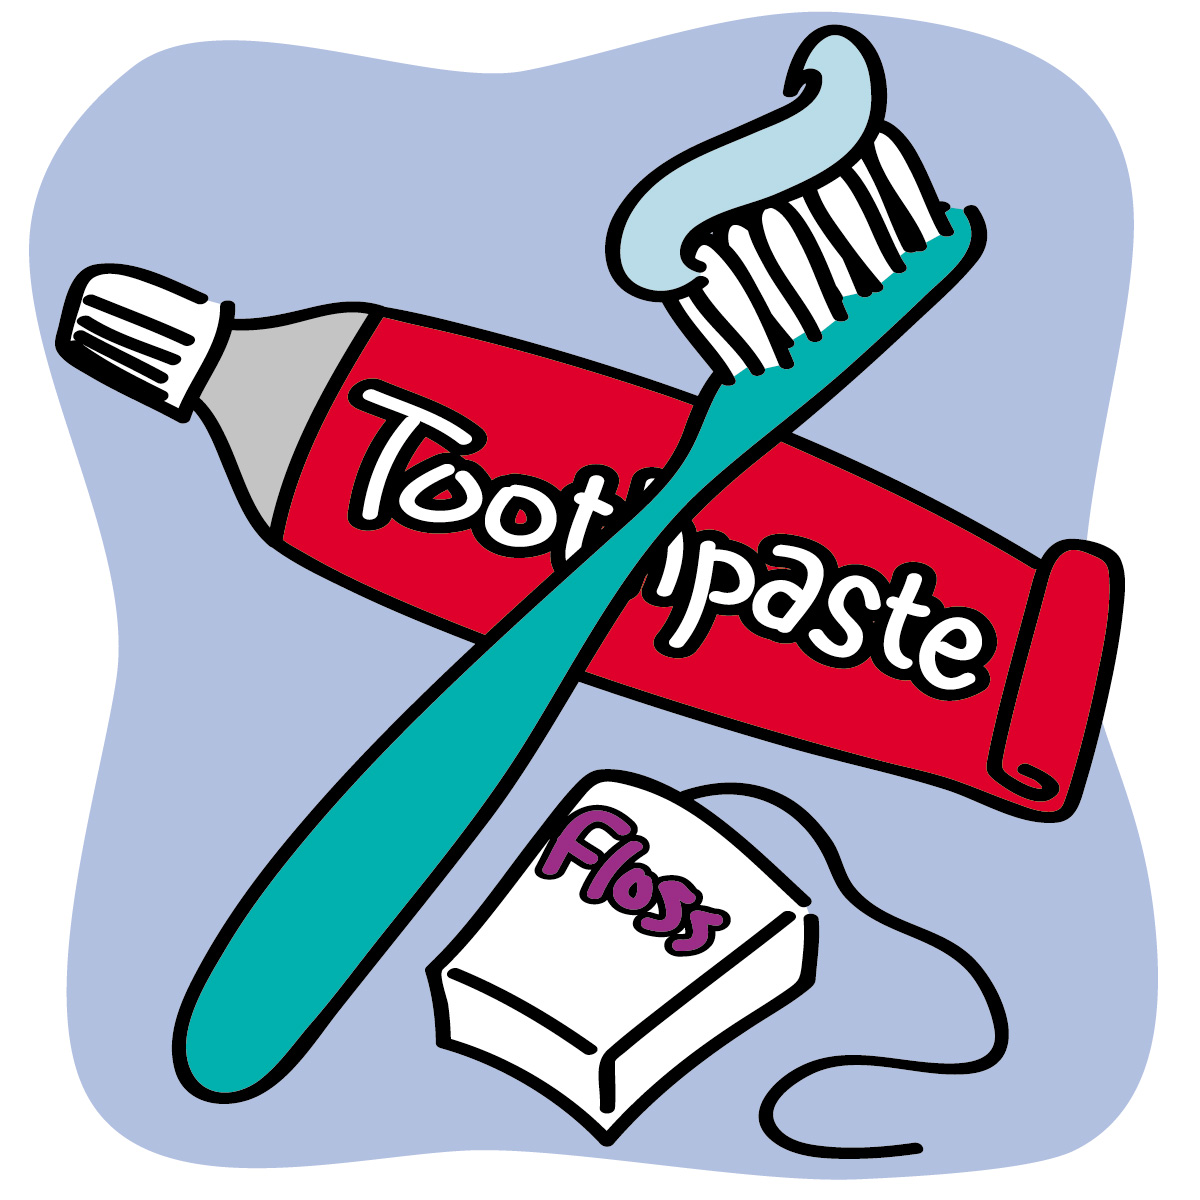 Toothbrush and toothpaste clipart.